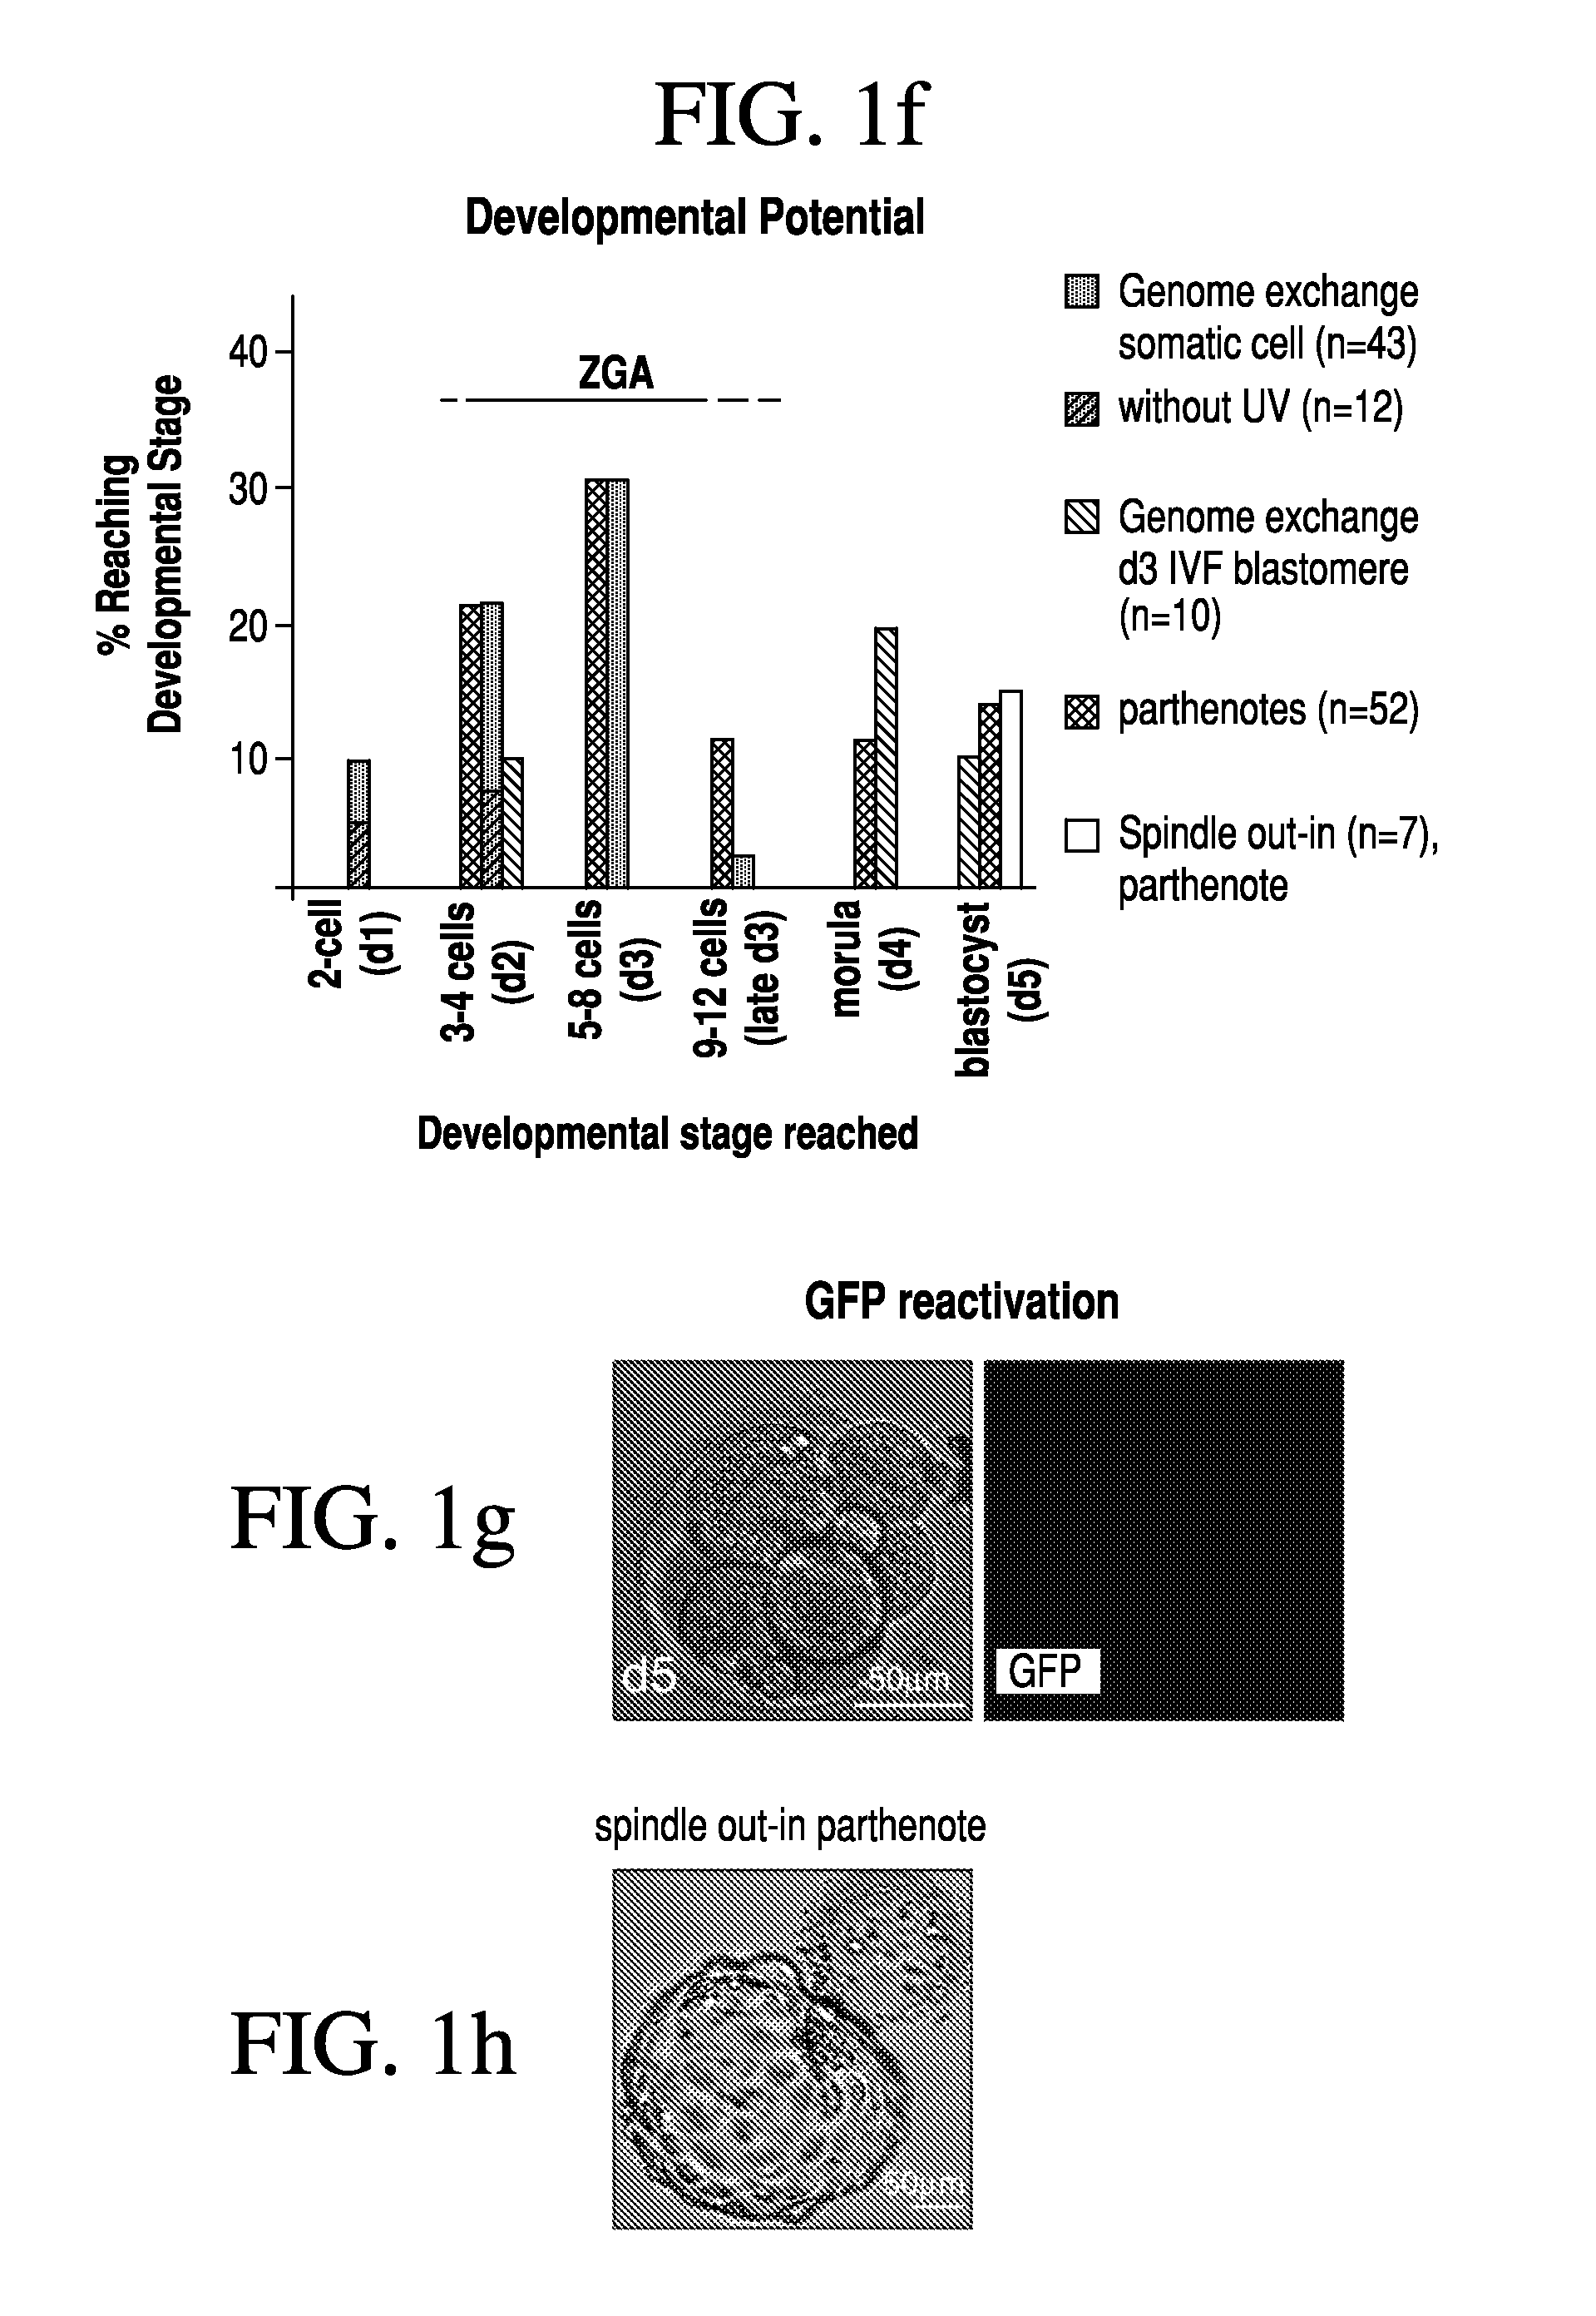 Method for producing pluripotent stem cells